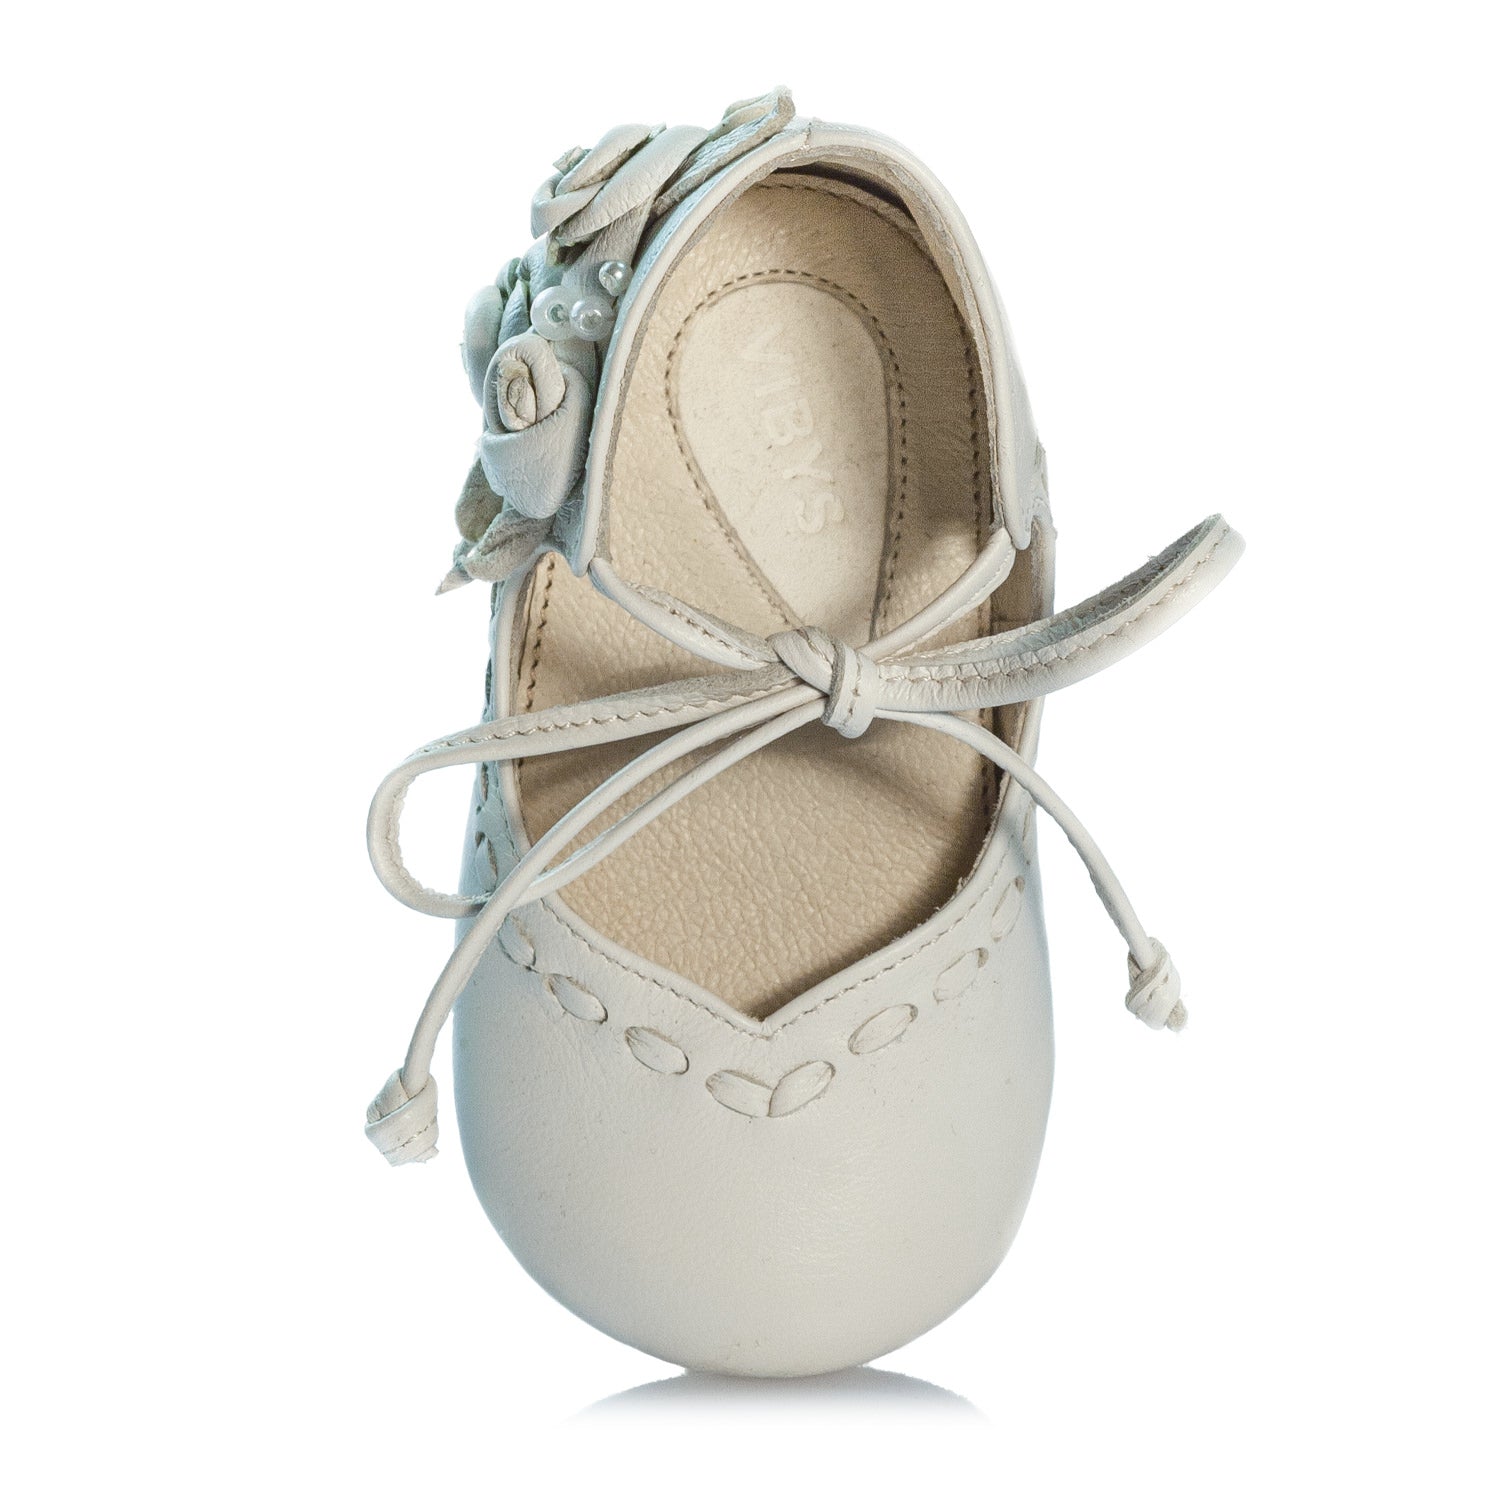 VIBYS Annika handcrafted ivory white soft leather baby girl wedding flats with roses and pearls